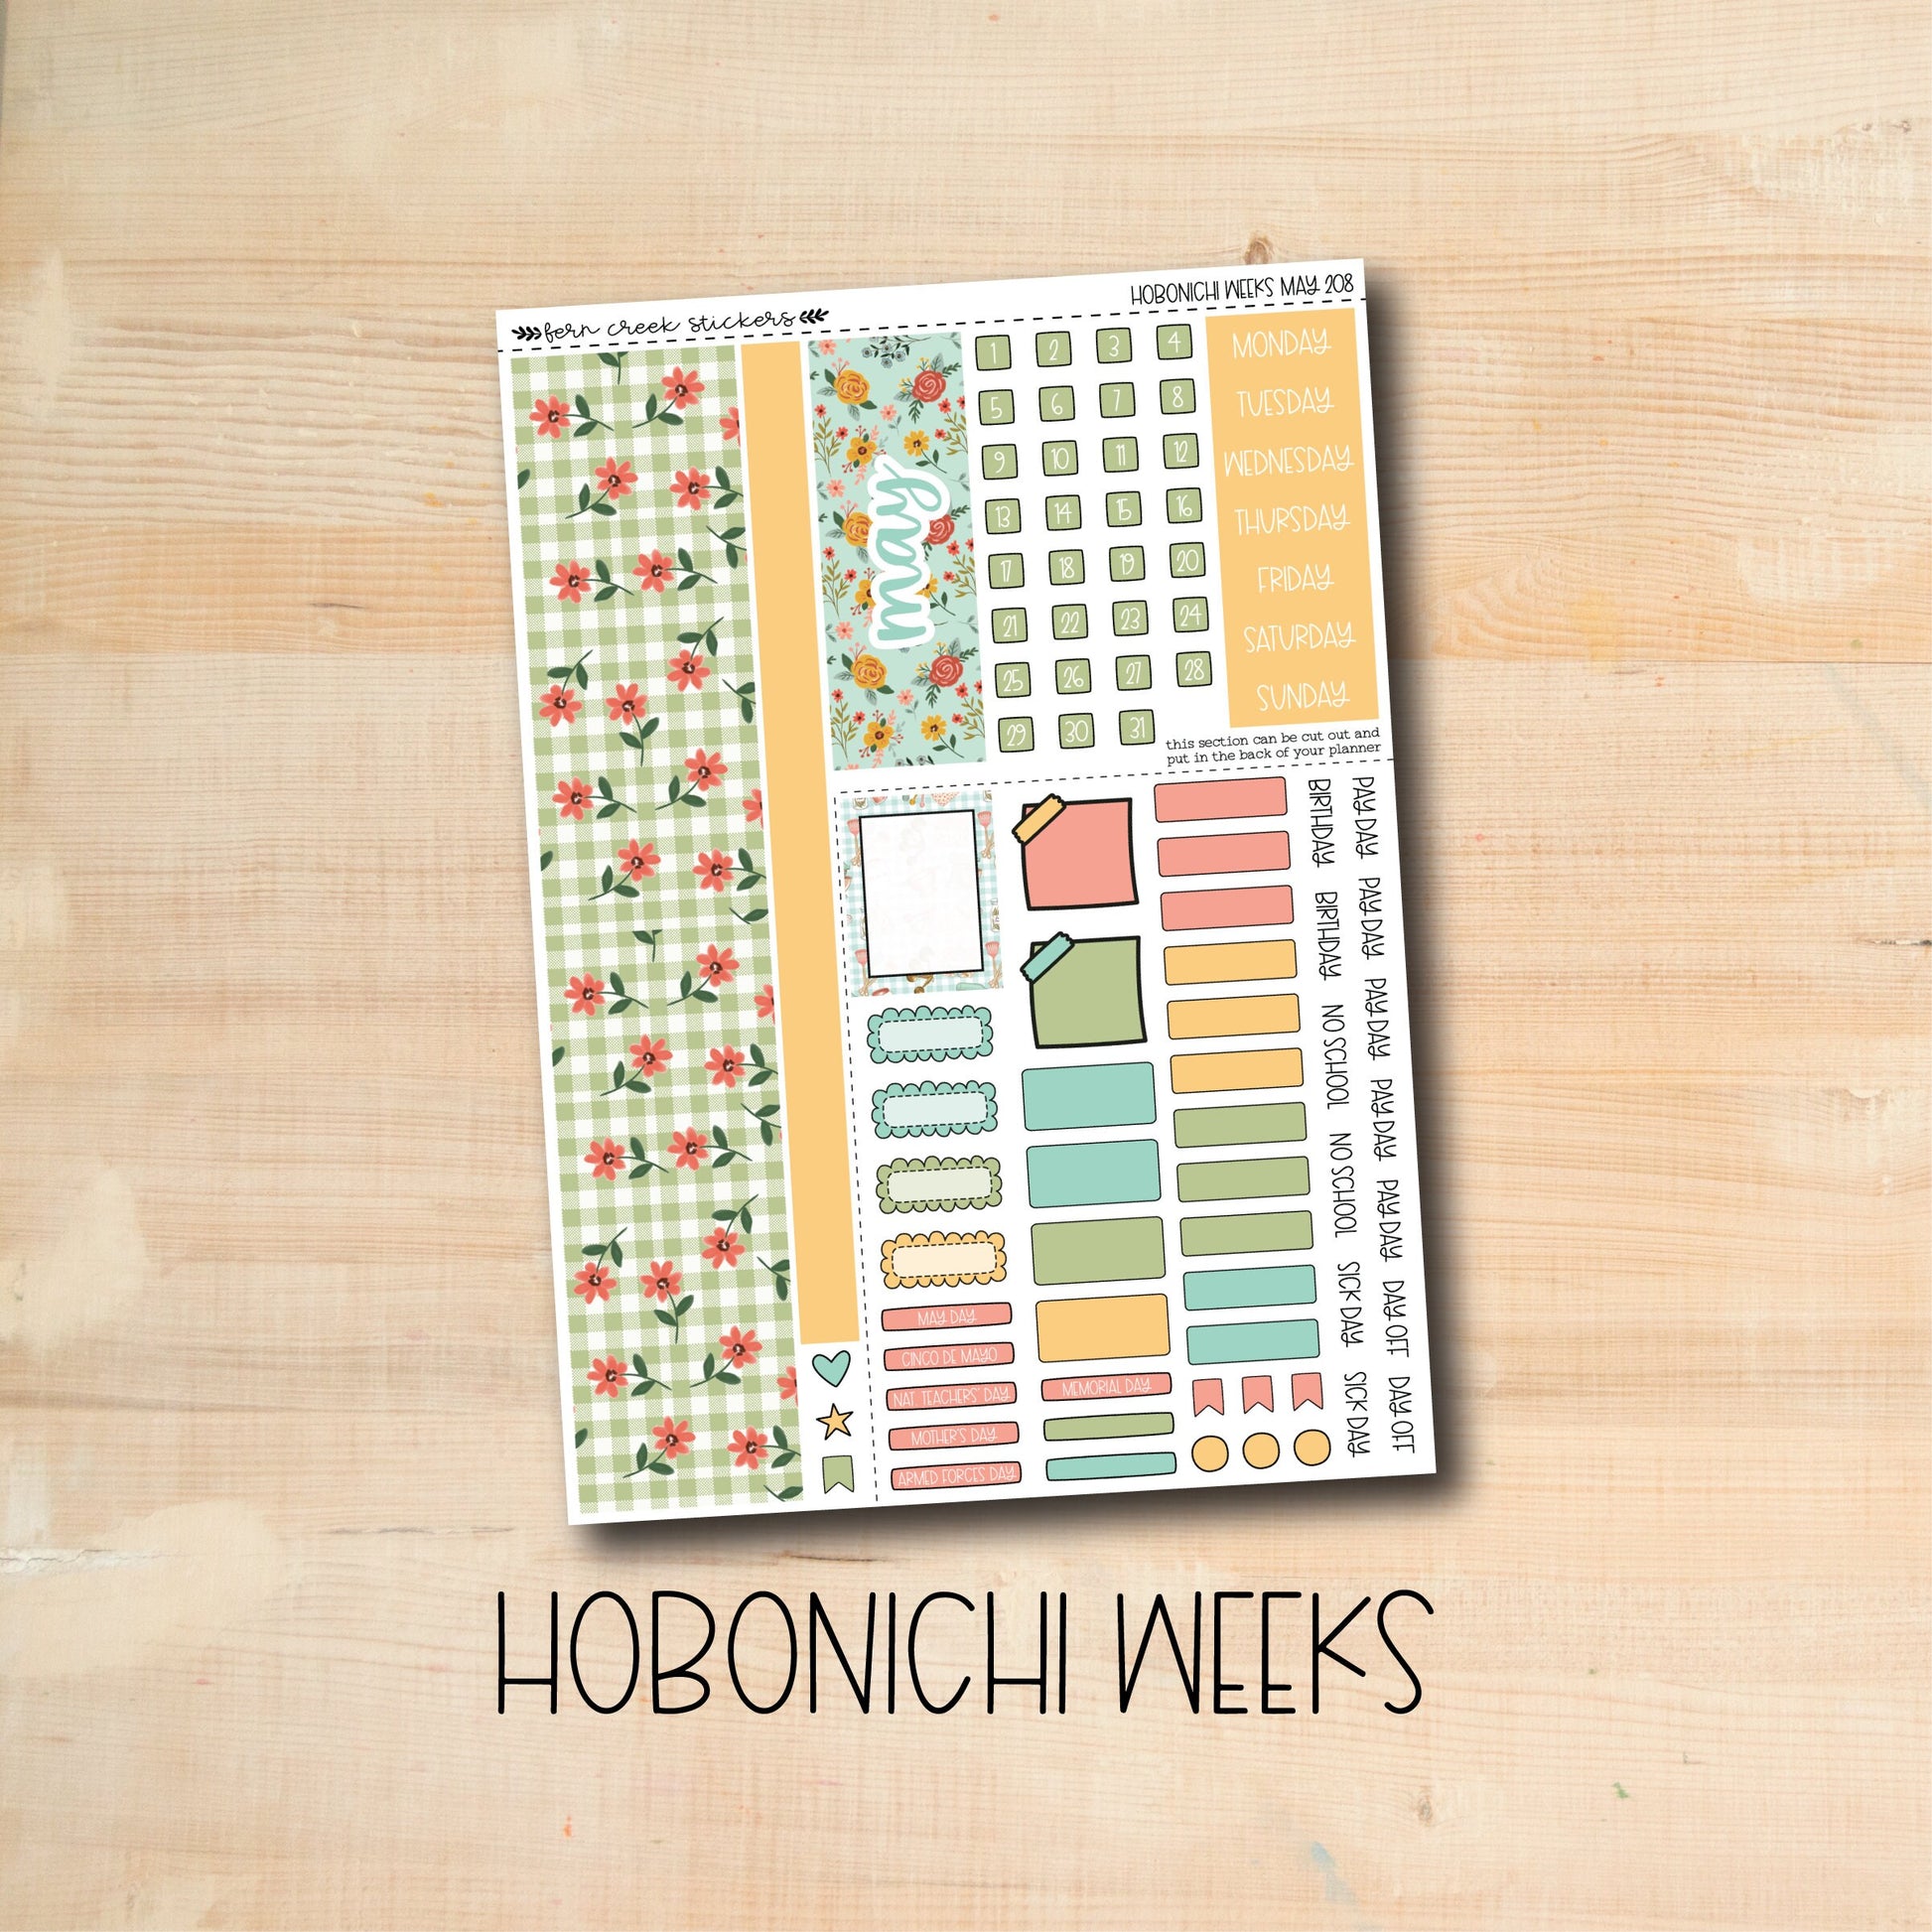 the hobonichi weeks stickers are on a wooden surface